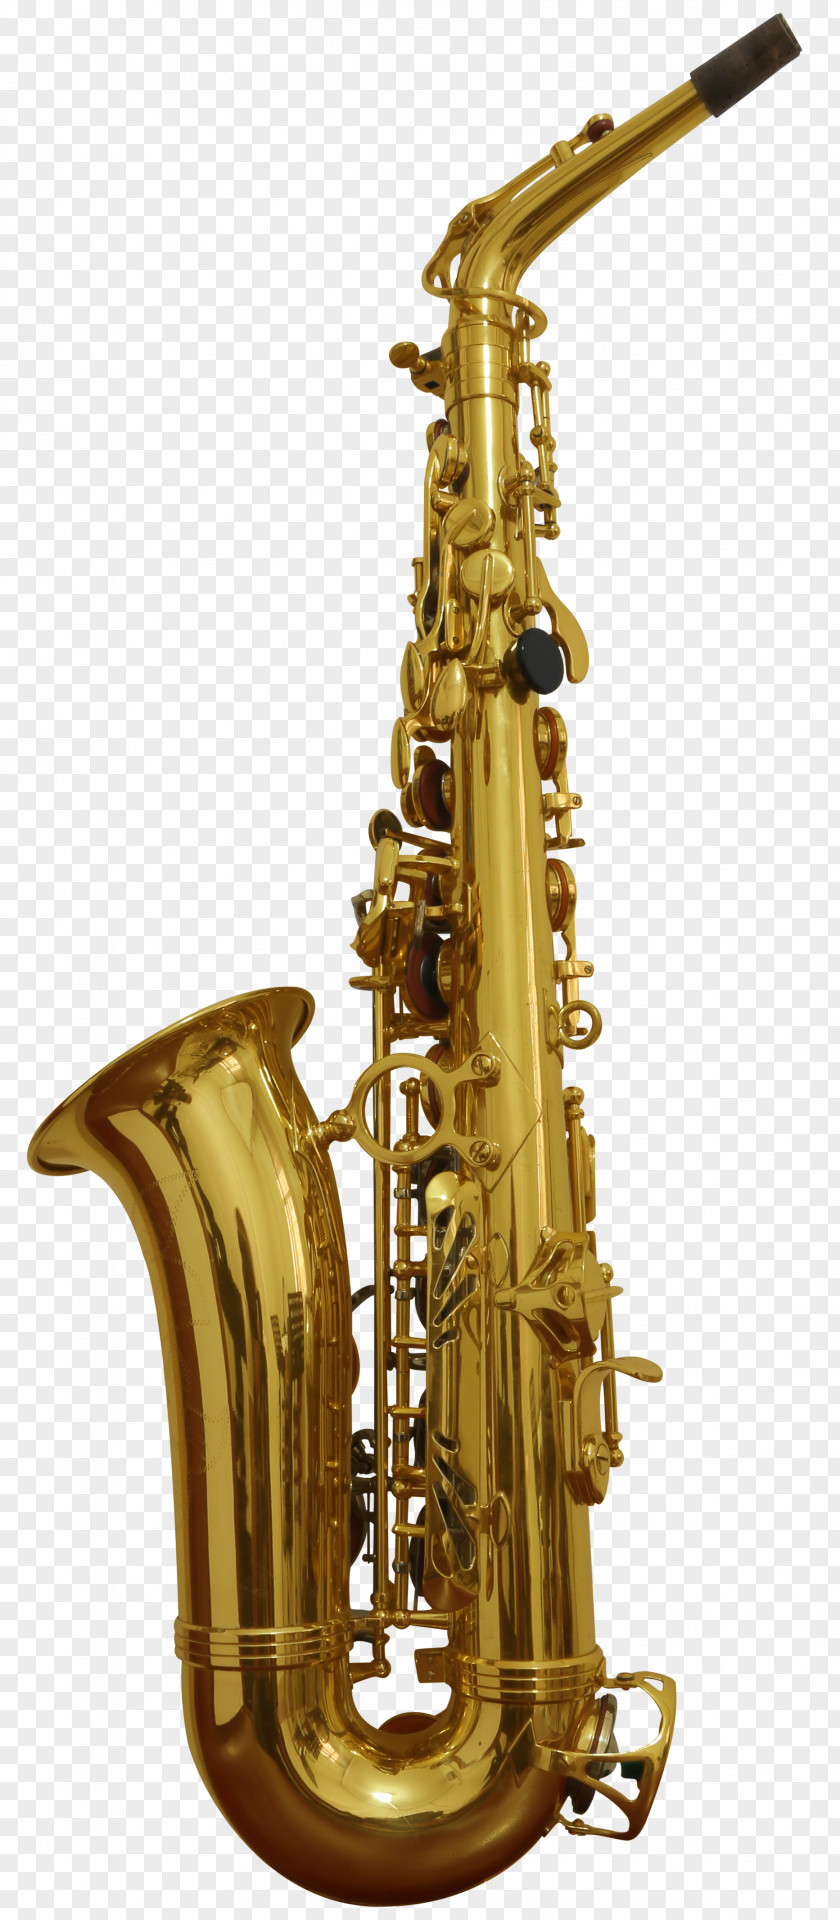 Instruments Baritone Saxophone Musical Woodwind Instrument Brass PNG